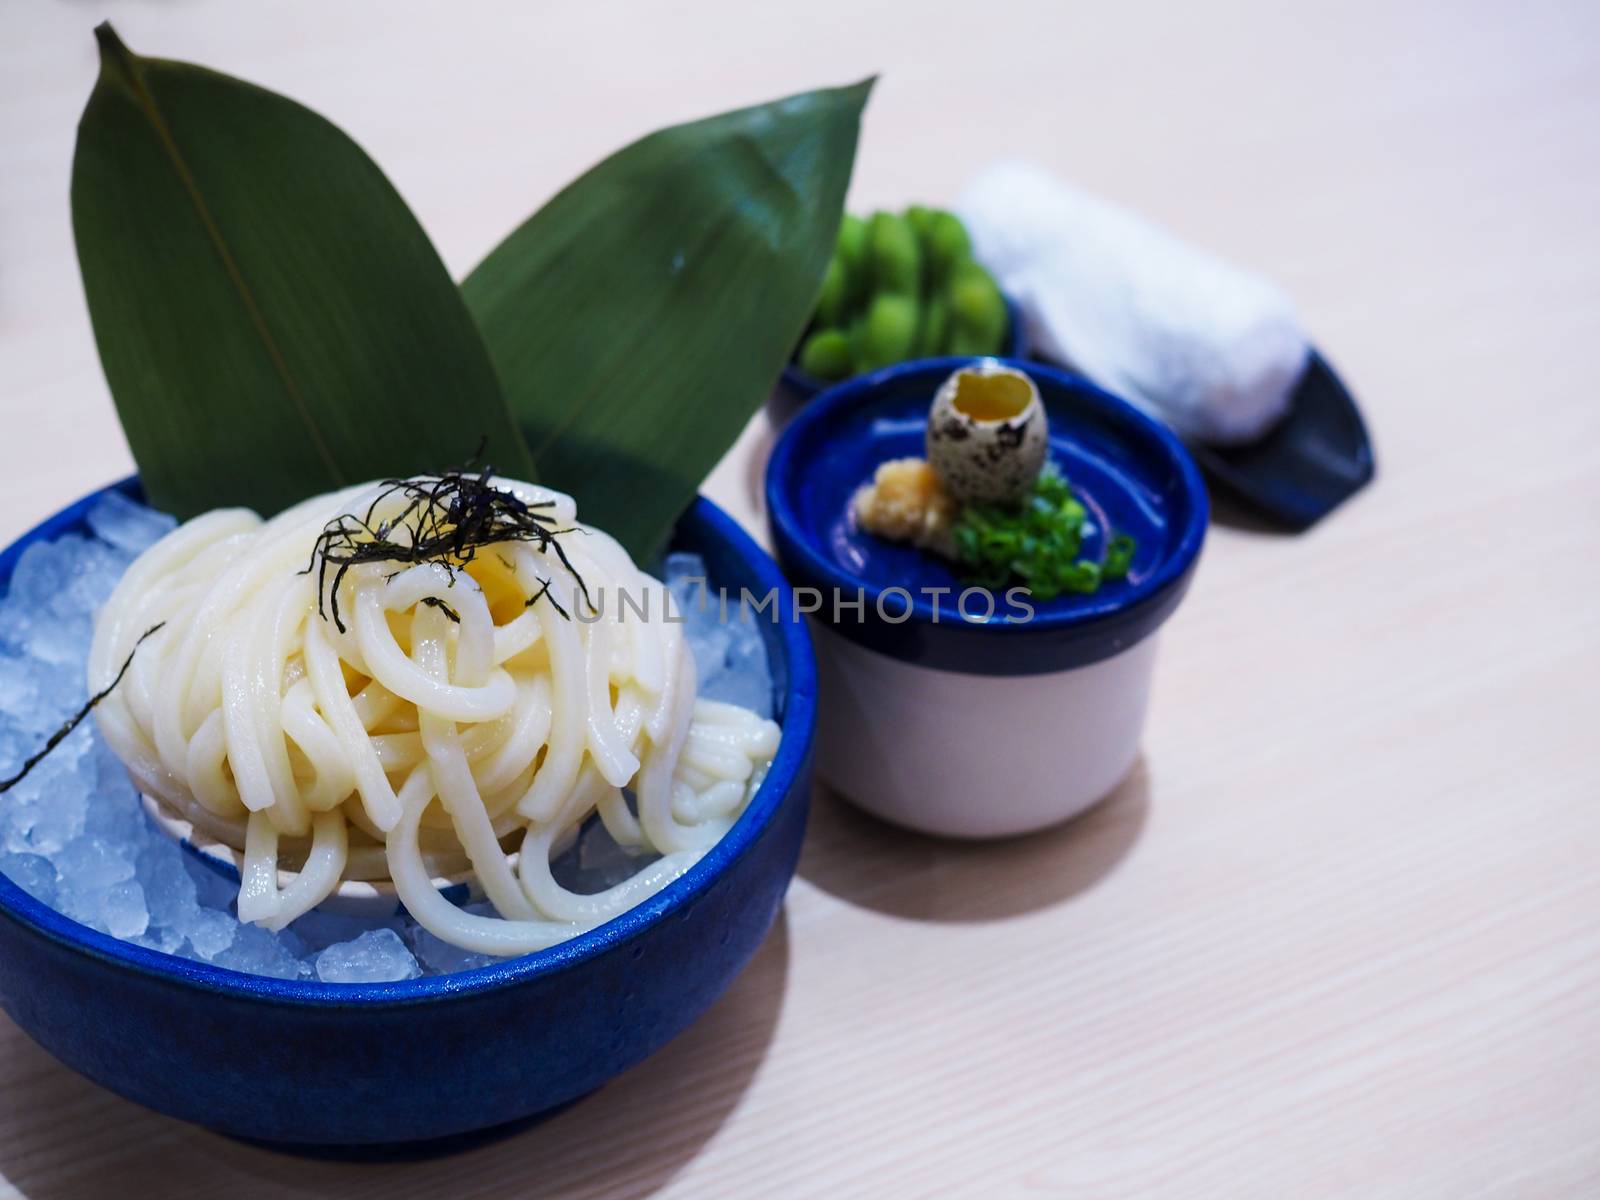 Zaru Soba, Udon noodles or Ramen. japanese food in the blue bowl with ice below.